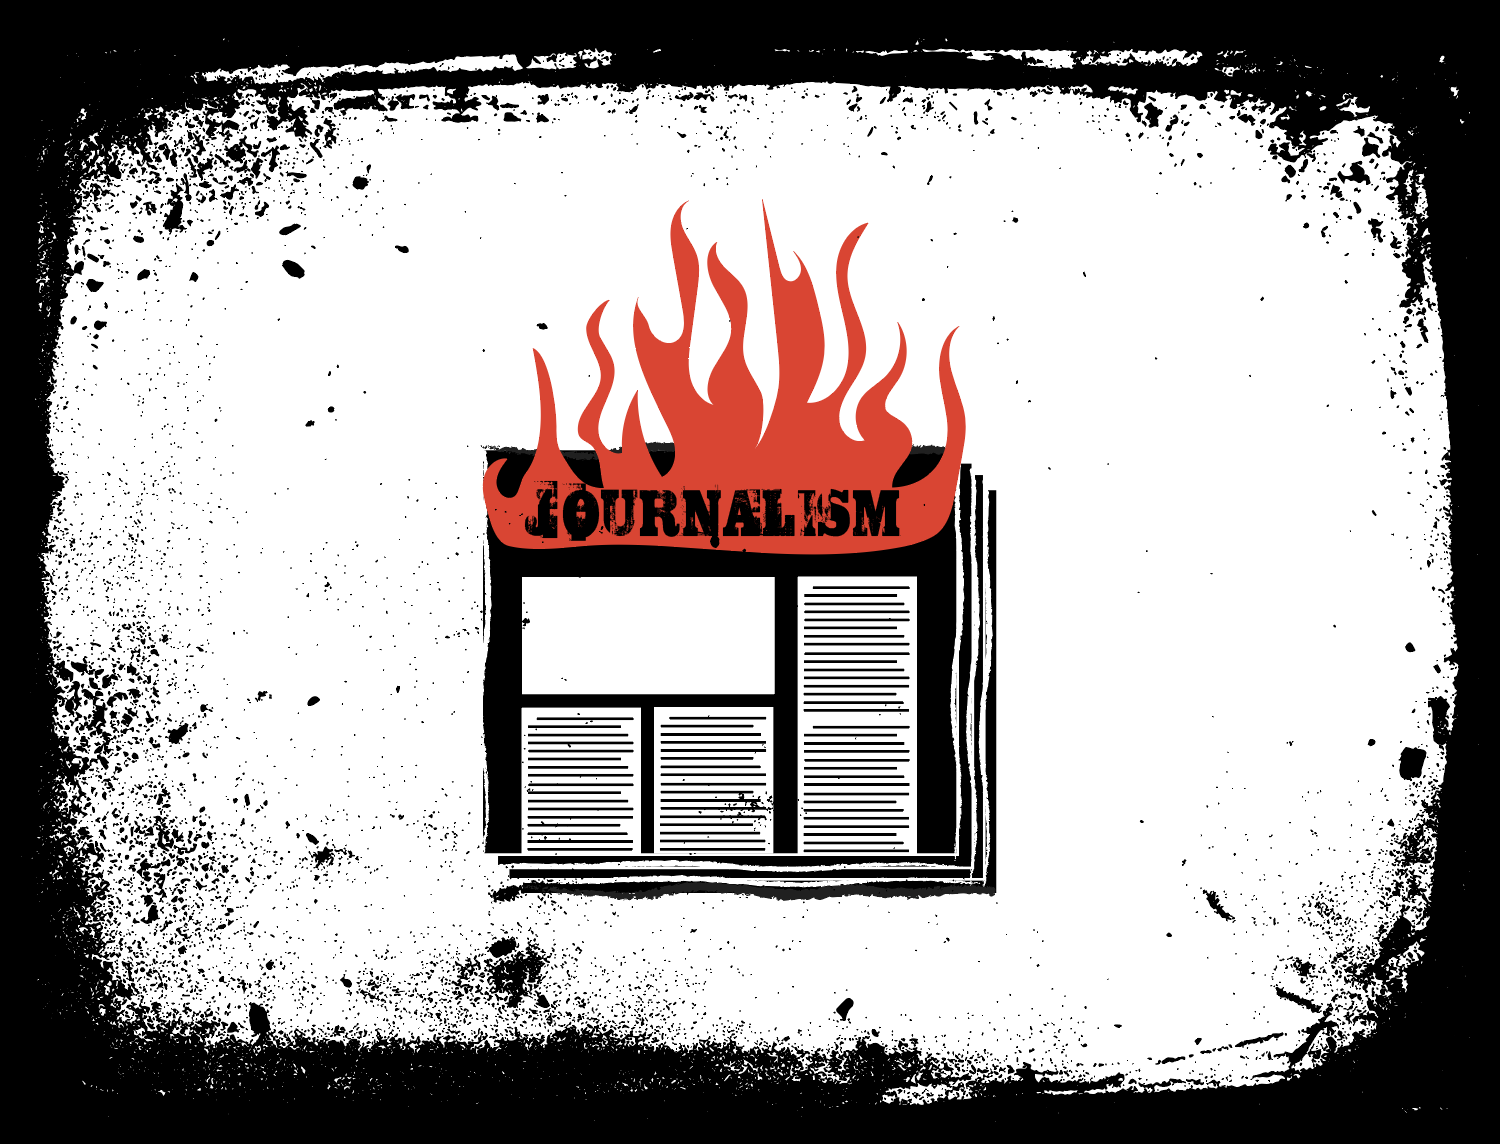 Photo illustration of newspaper on fire.